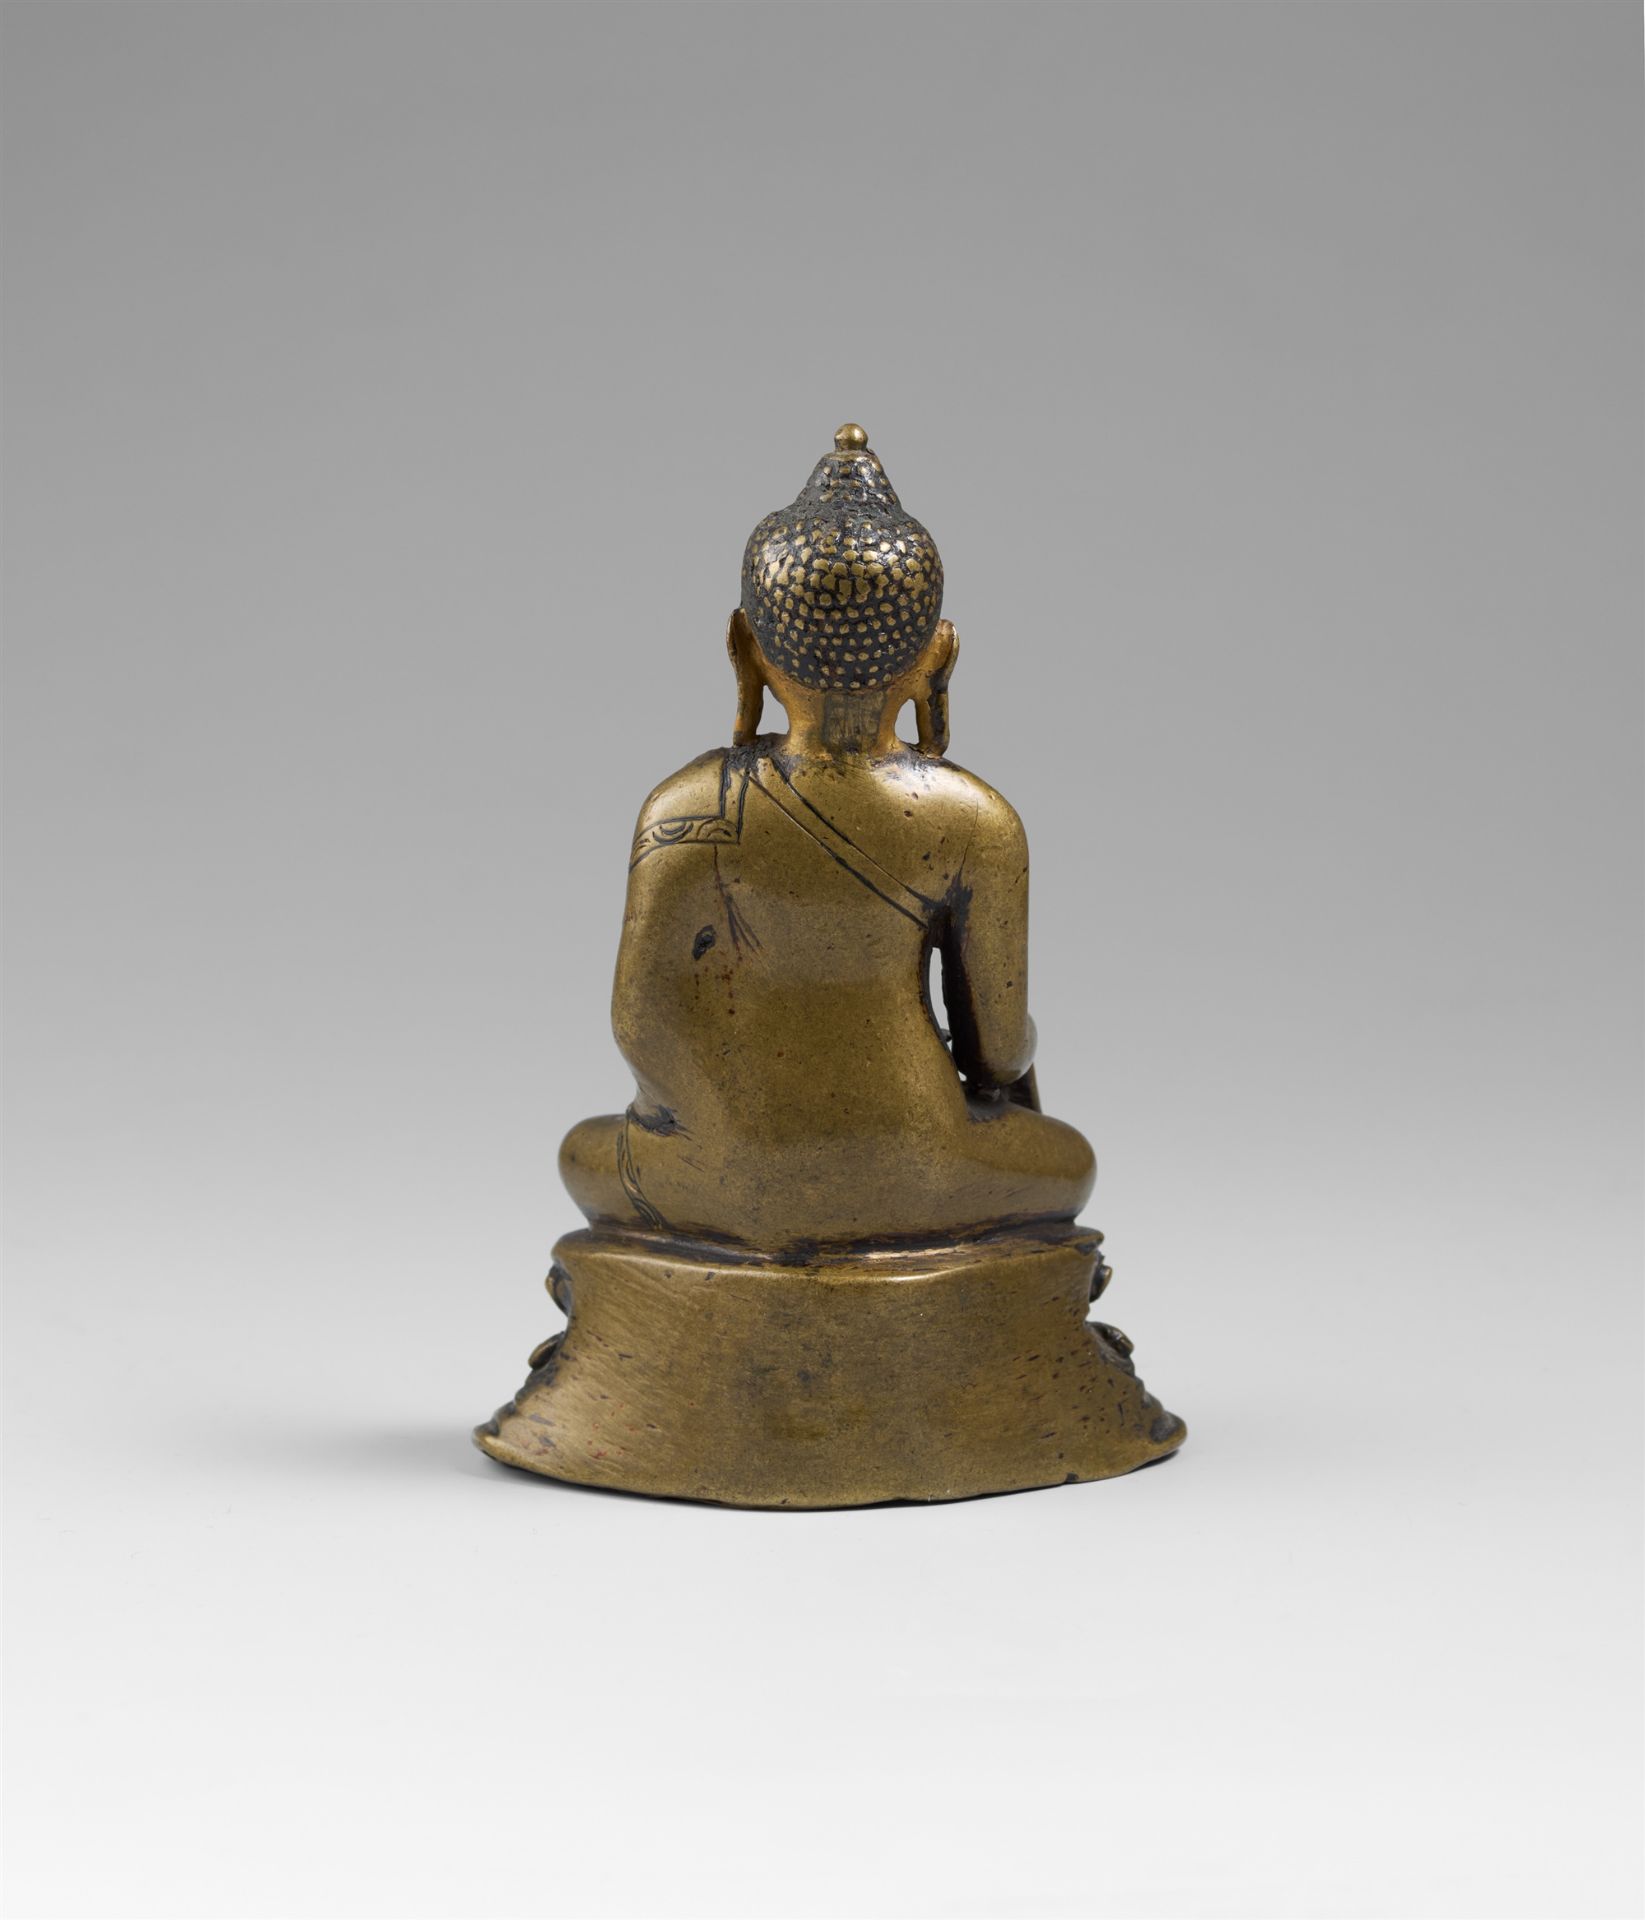 A Tibetan copper alloy figure of Buddha Shakyamuni with cold gold. 14th/15 century - Image 2 of 2